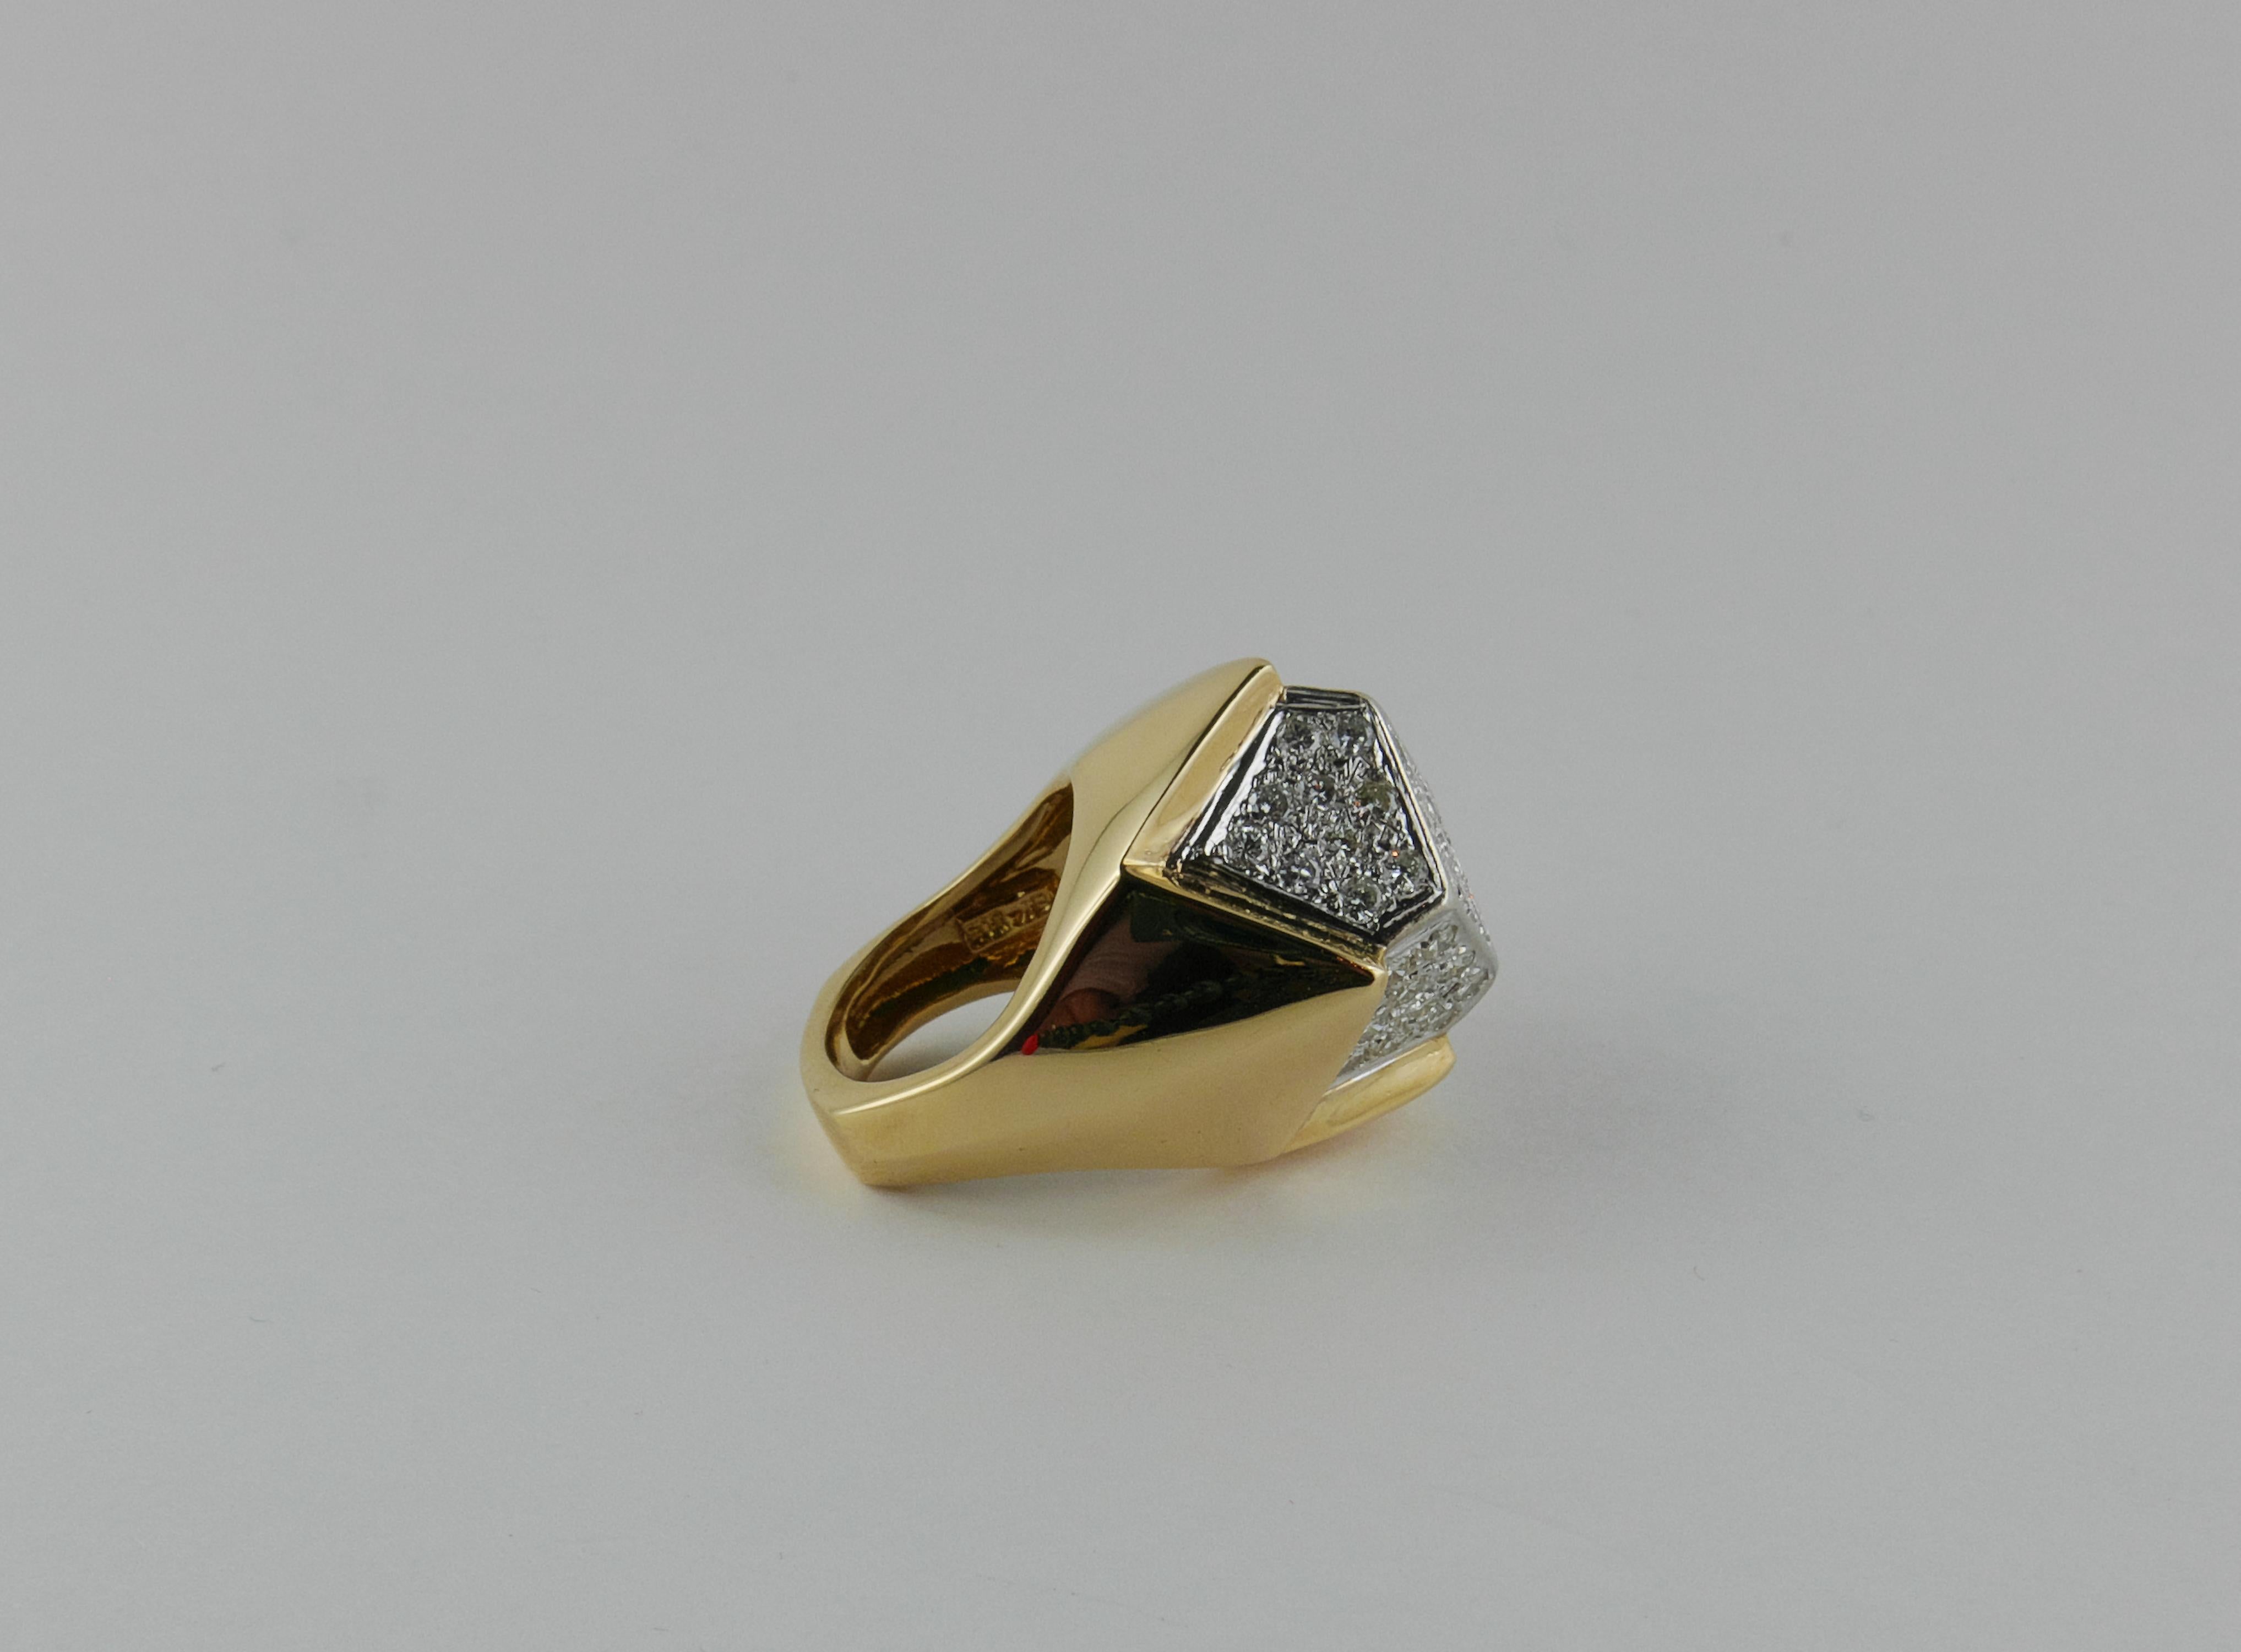 Sleek and intriguing 1970s geometric Ring finely crafted in rich 18 karat Gold and  brilliant cut Diamonds set in Platinum.
This stylish and always modern Ring is in Yellow Gold, formed of a geometrical crown shape setting adorned on its top with an